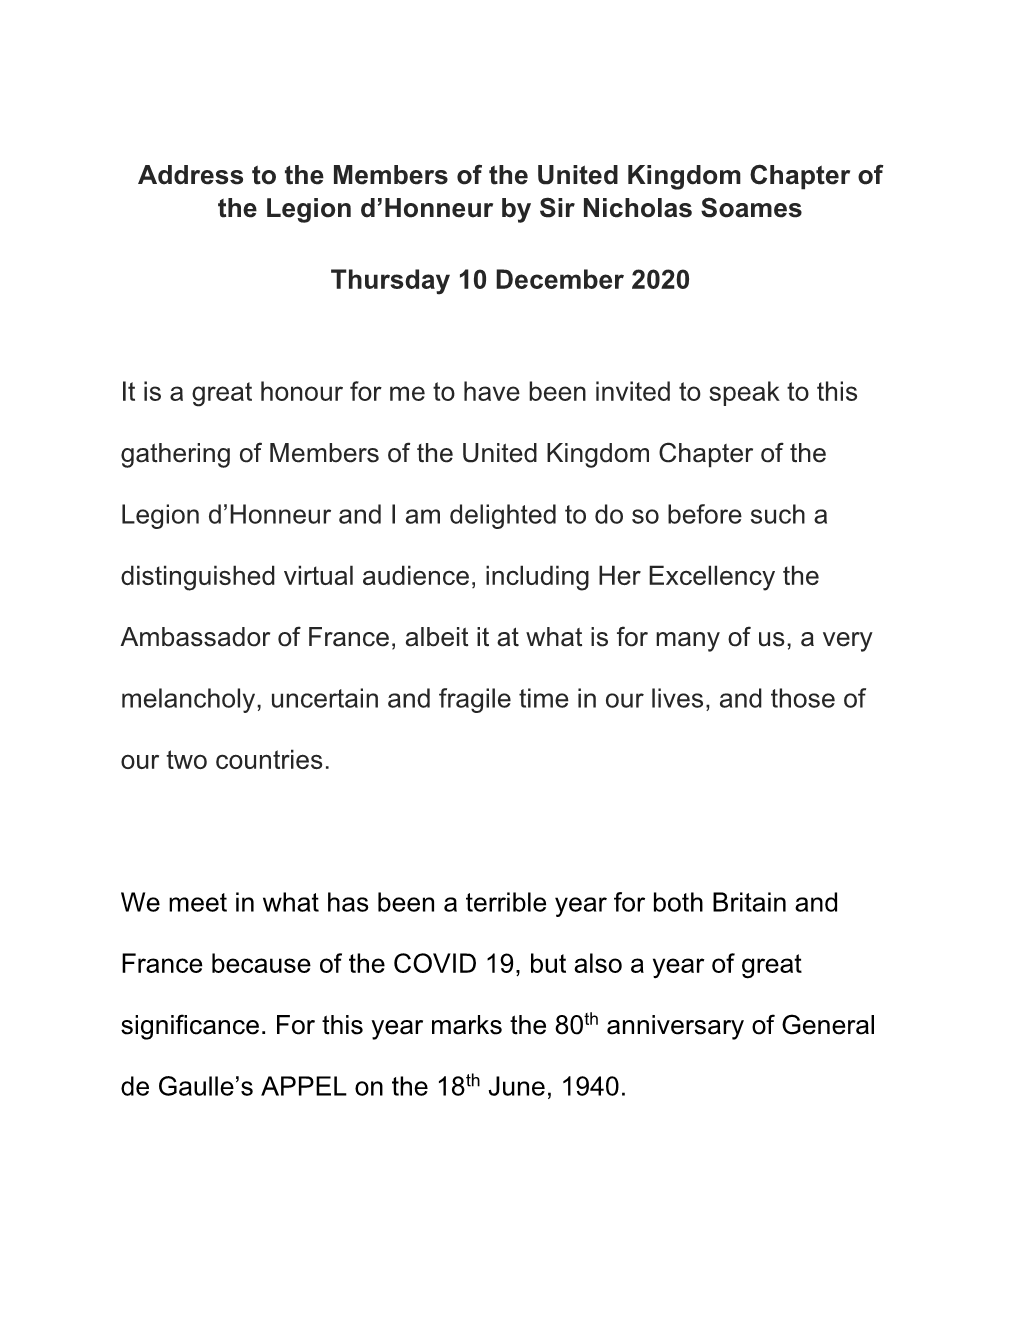 Address to the Members of the United Kingdom Chapter of the Legion D’Honneur by Sir Nicholas Soames